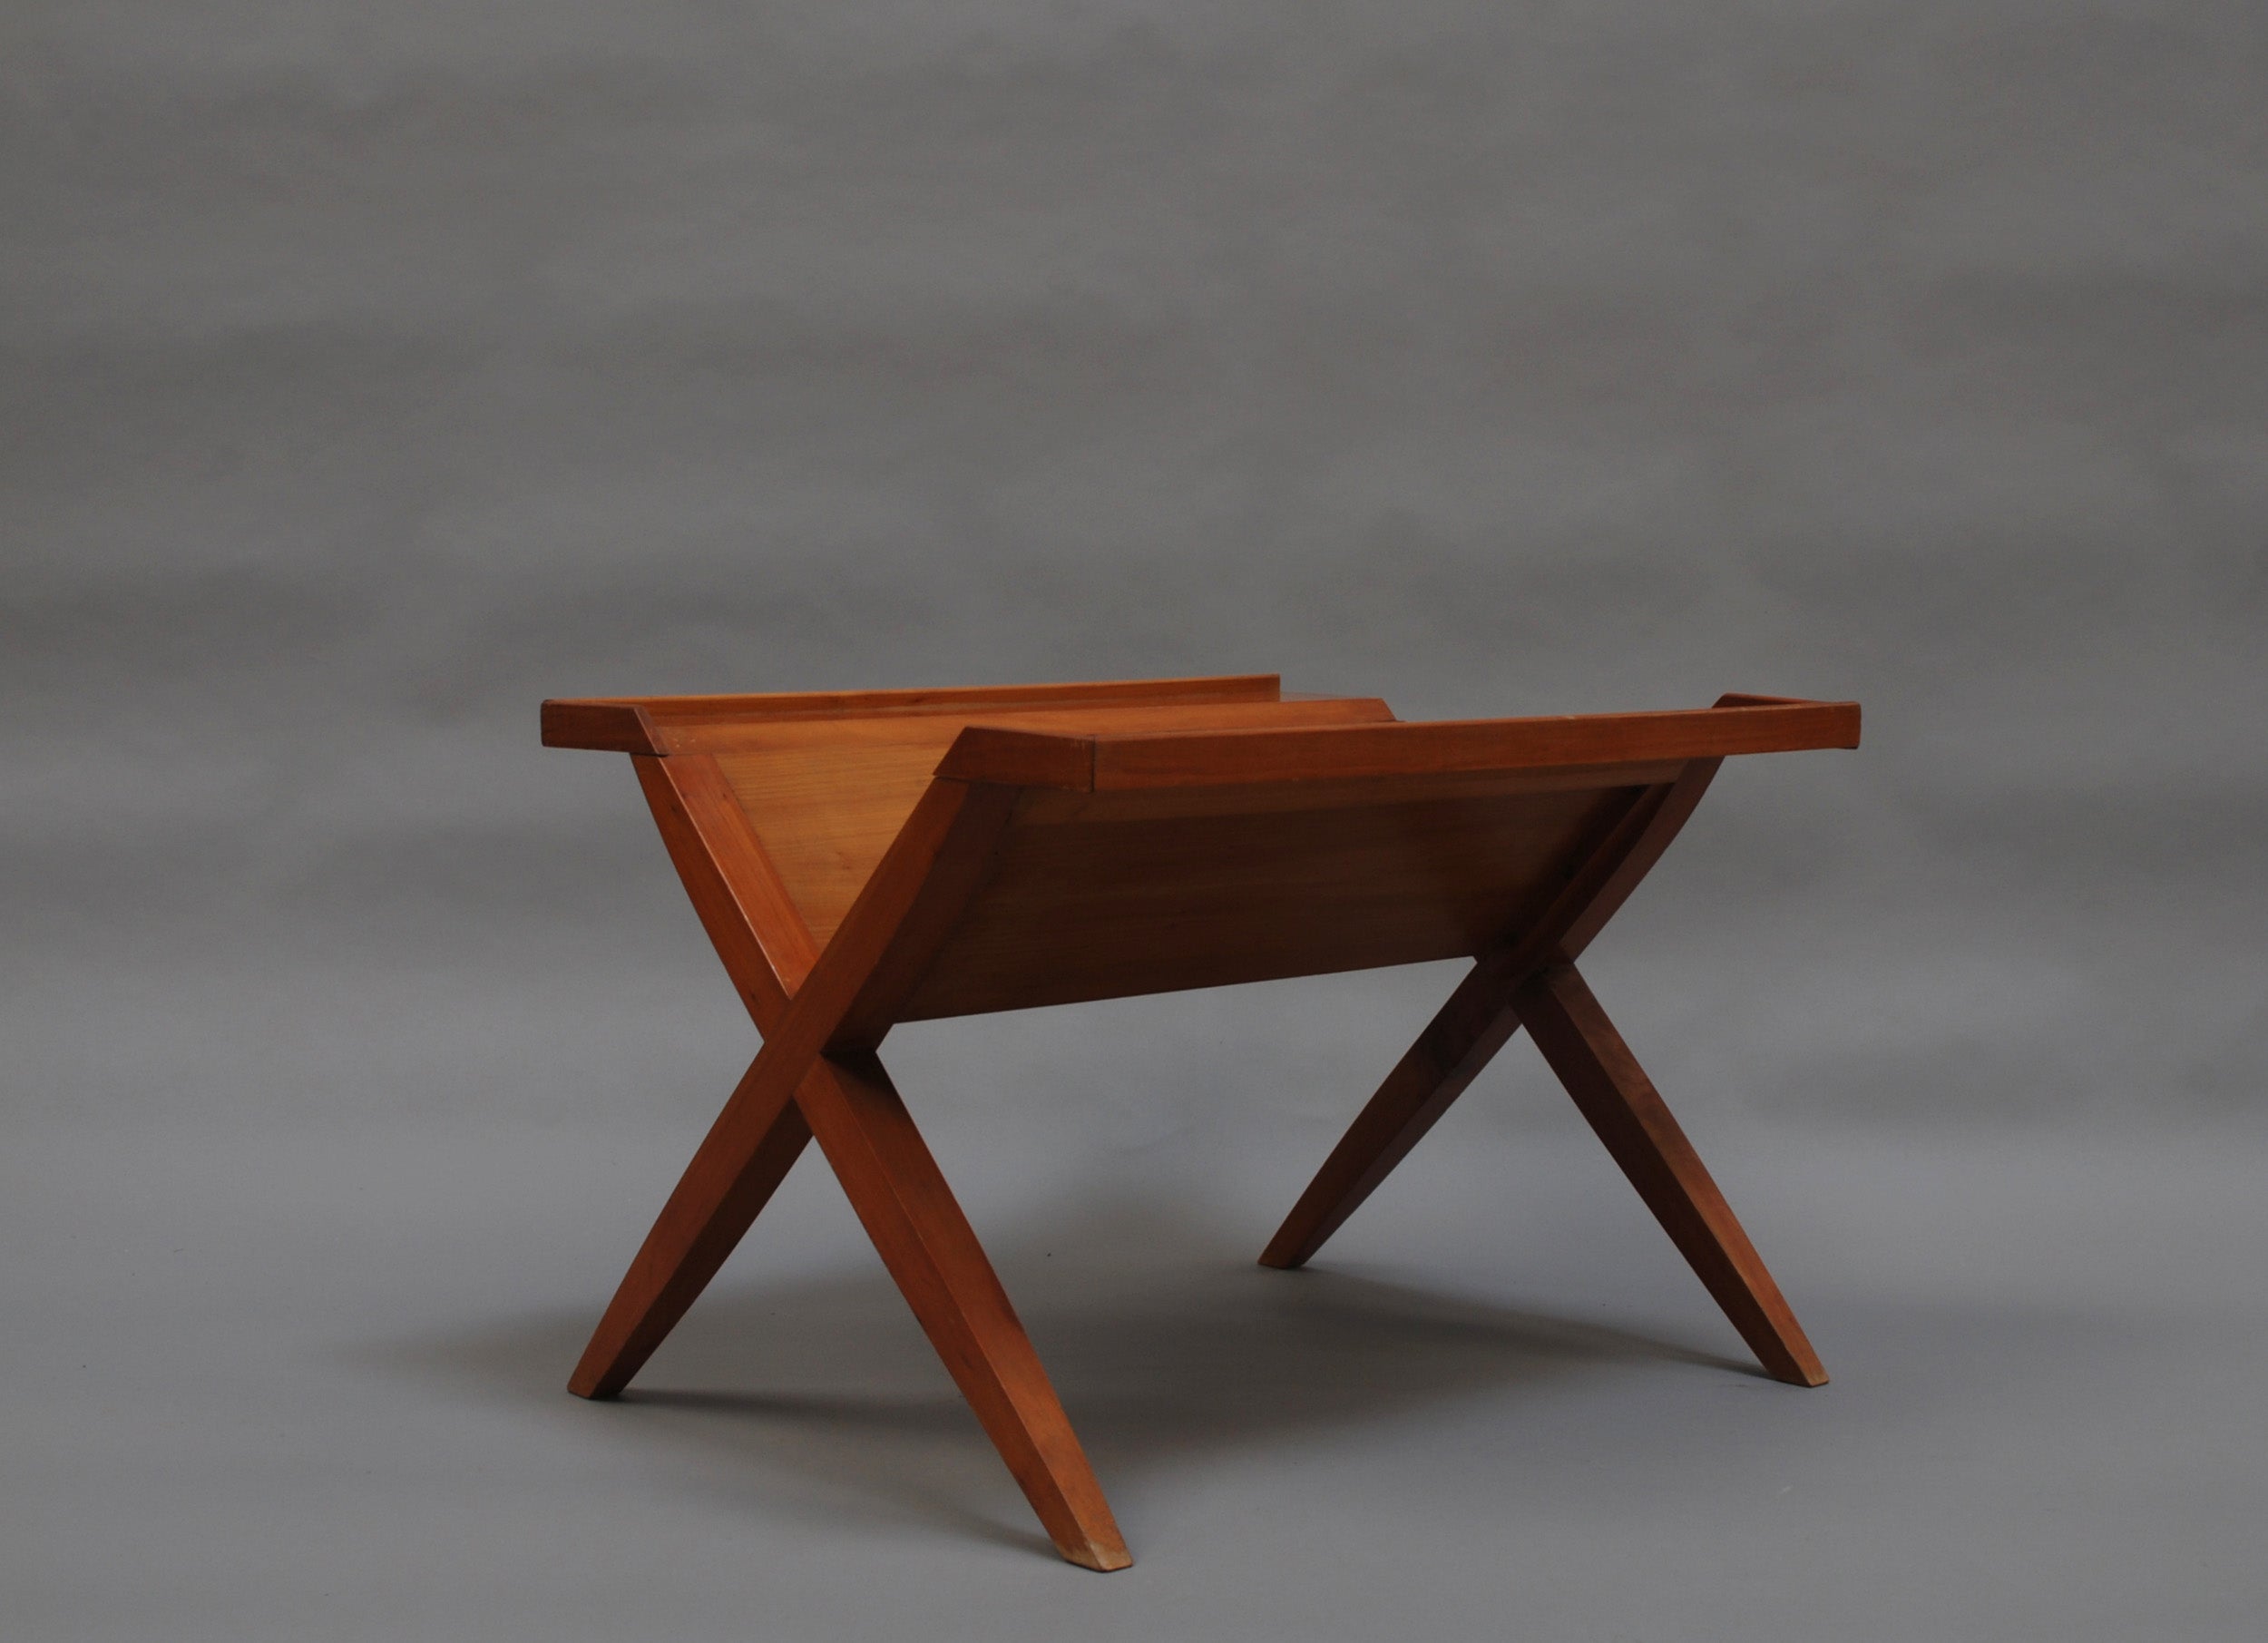 A fine French midcentury cherrywood magazines rack or sofa table by Roger Landault.
Documented.